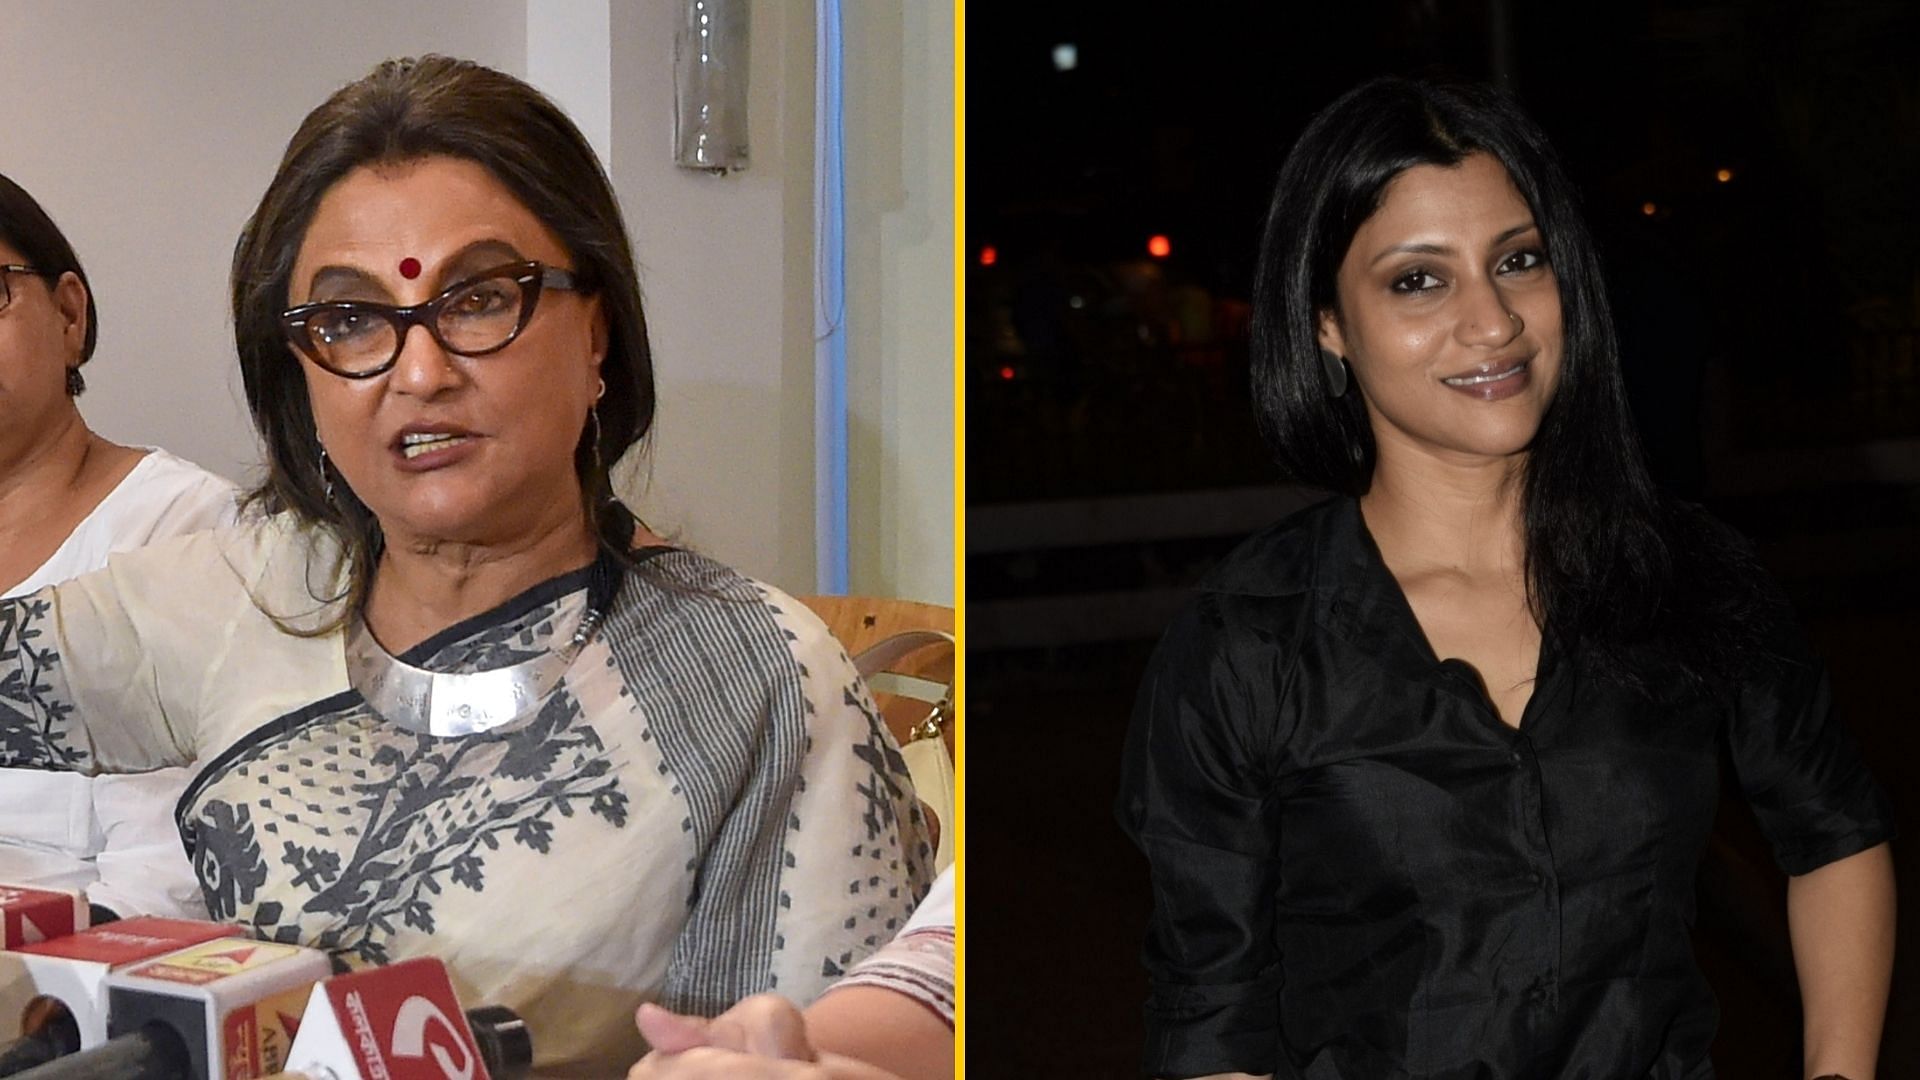 A case has been filed against Aparna Sen, Konkona Sen Sharma and other celebs who wrote a letter to Modi in protest of mob lynchings.